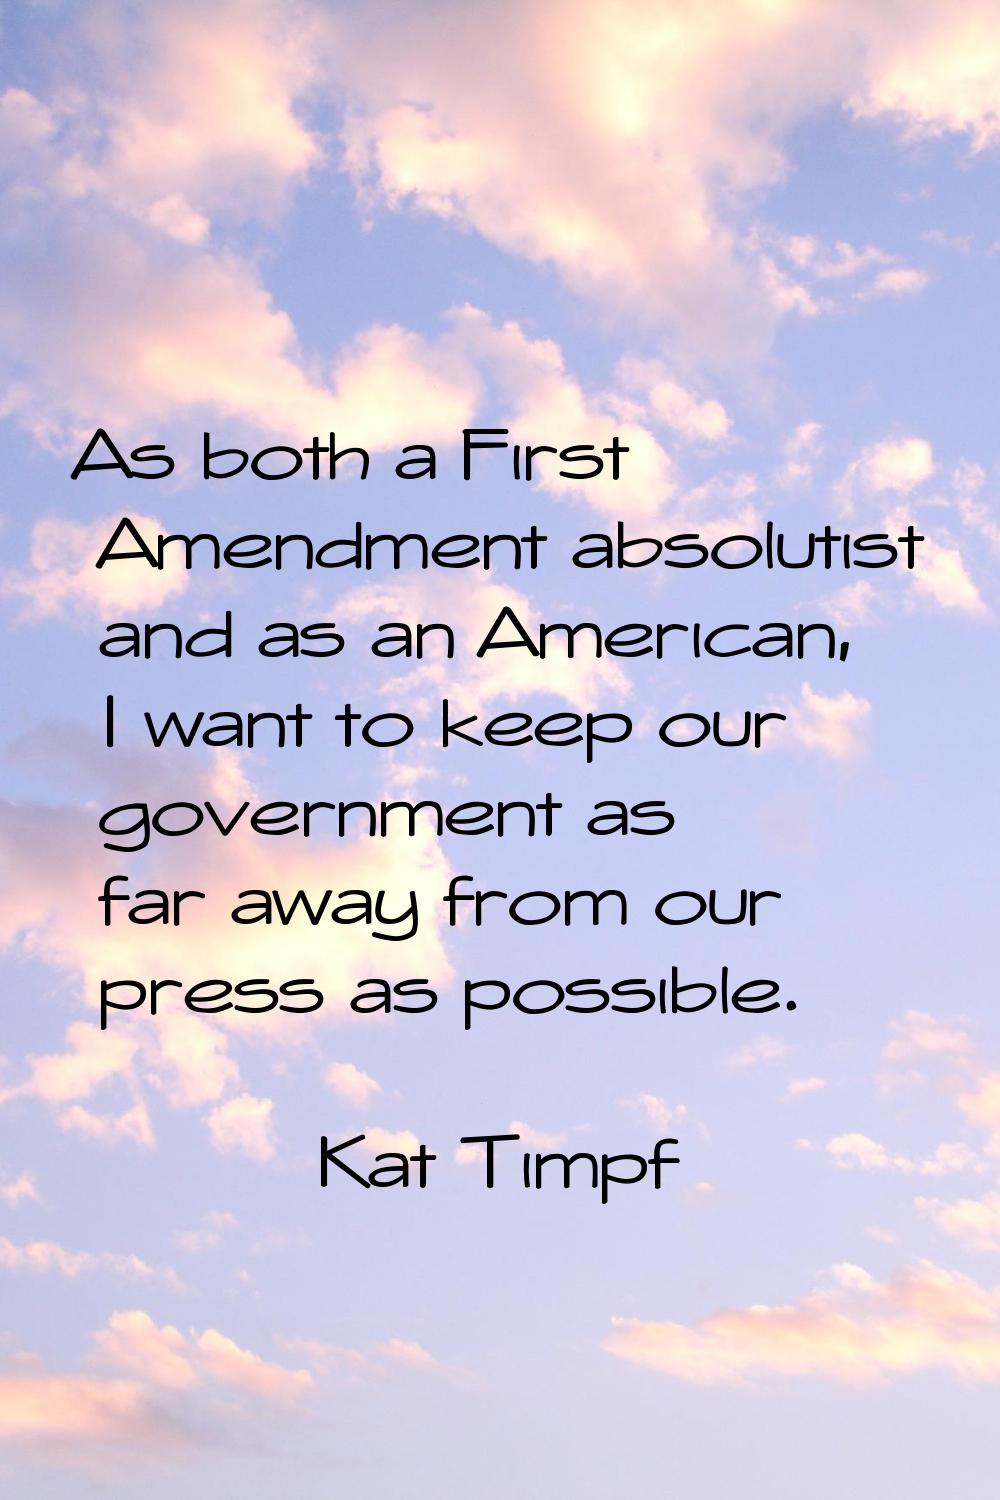 As both a First Amendment absolutist and as an American, I want to keep our government as far away 